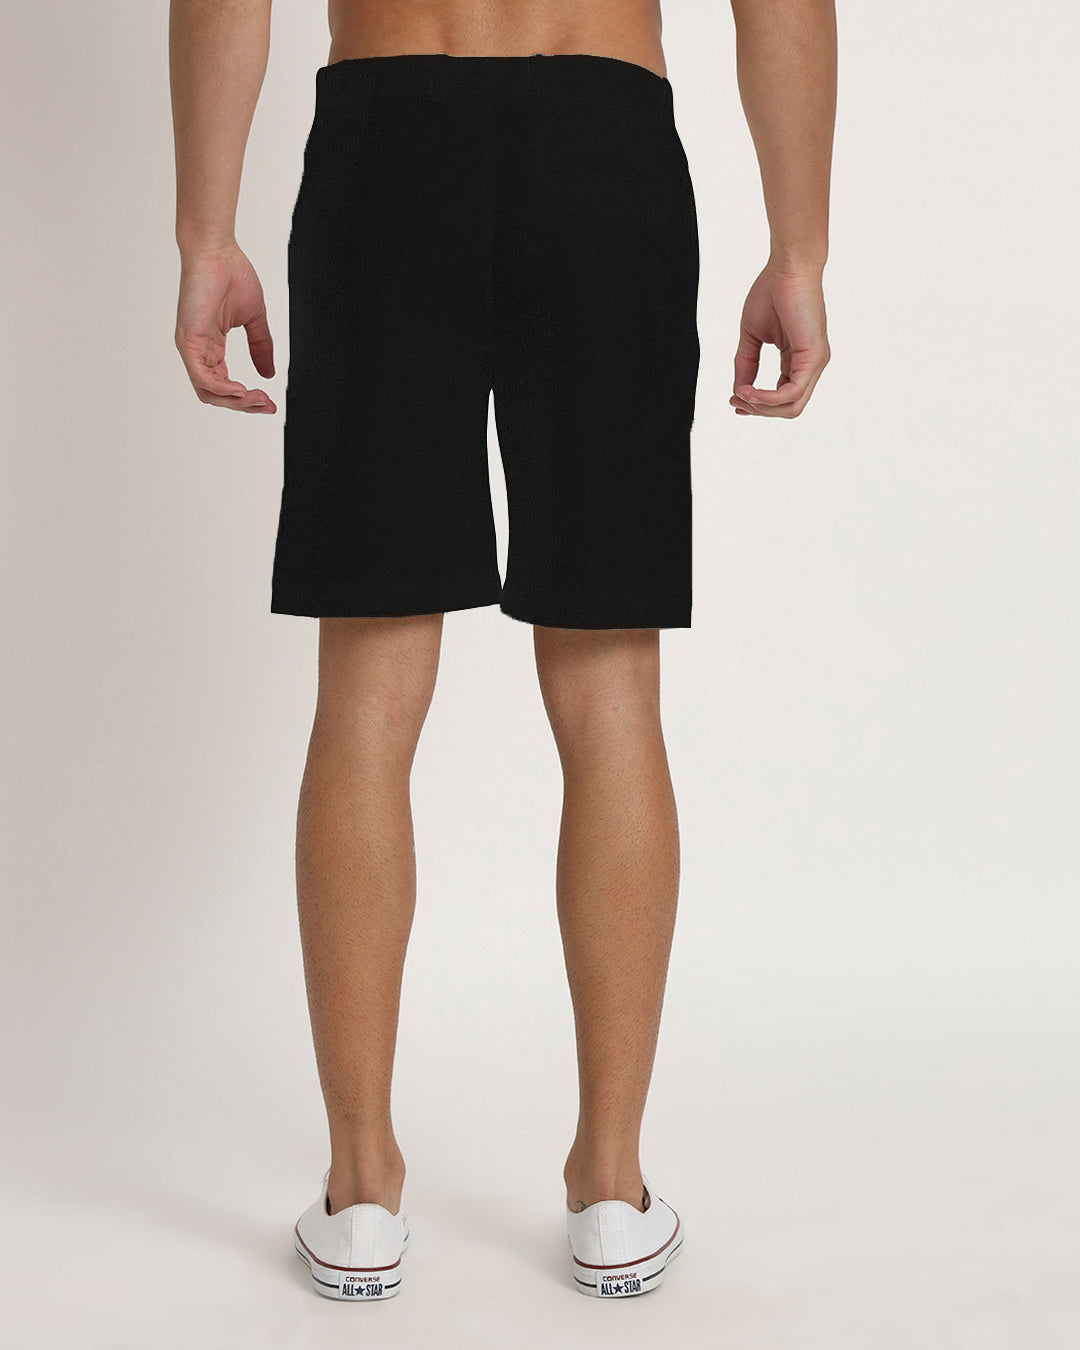 Ready For Anything Black Men's Shorts